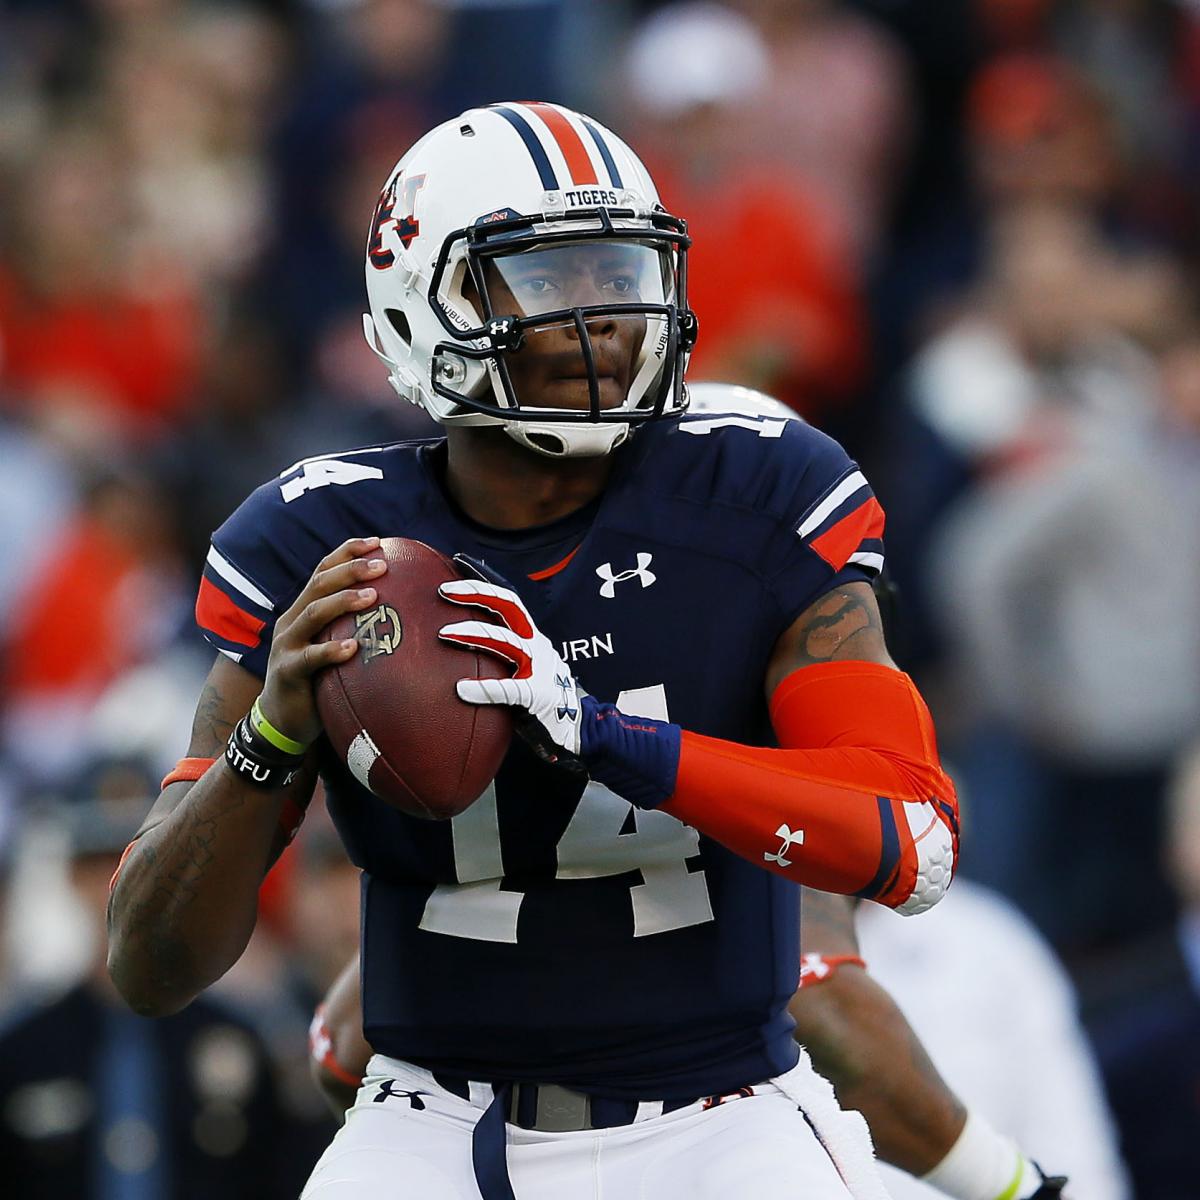 Auburn 2014 Quarterback Fall Practice Preview: Depth Chart and Analysis